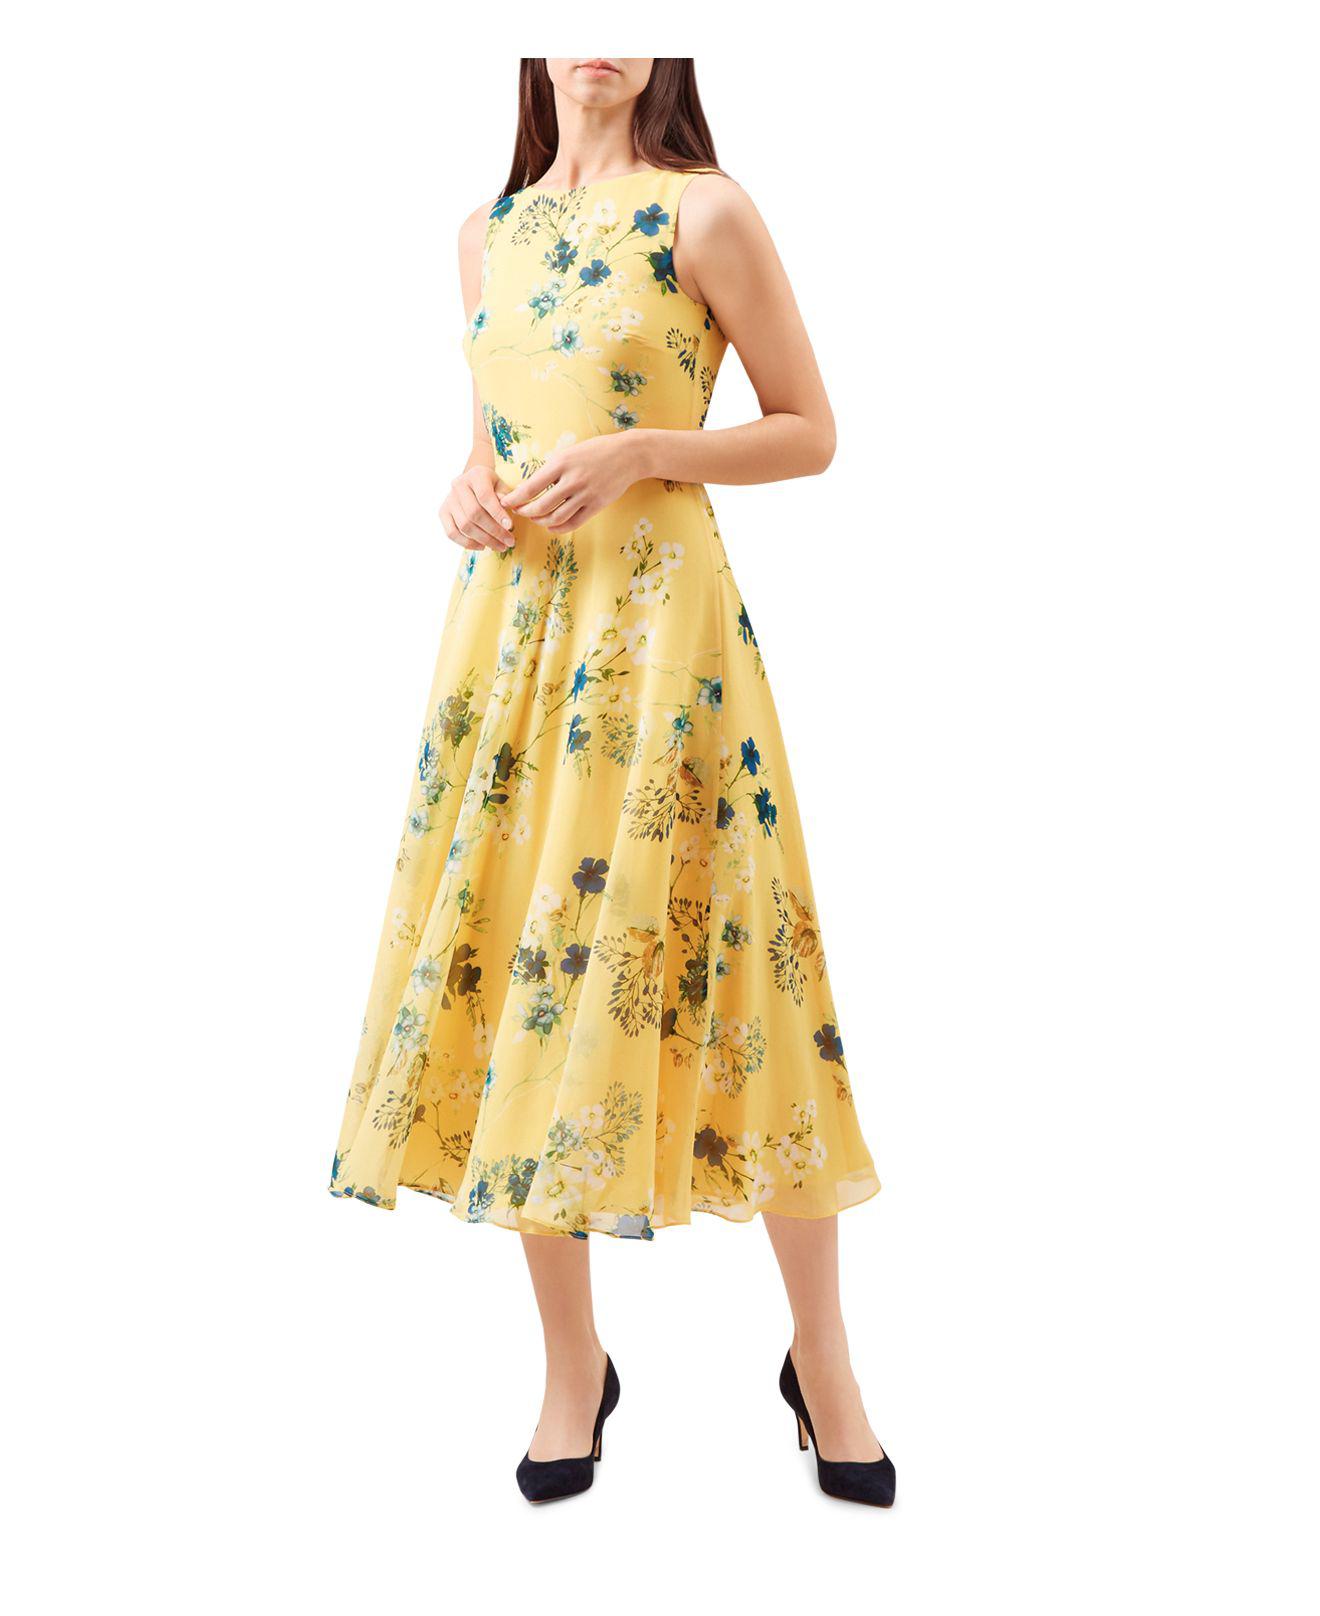 Hobbs Carly Floral Print Midi Dress in Yellow | Lyst